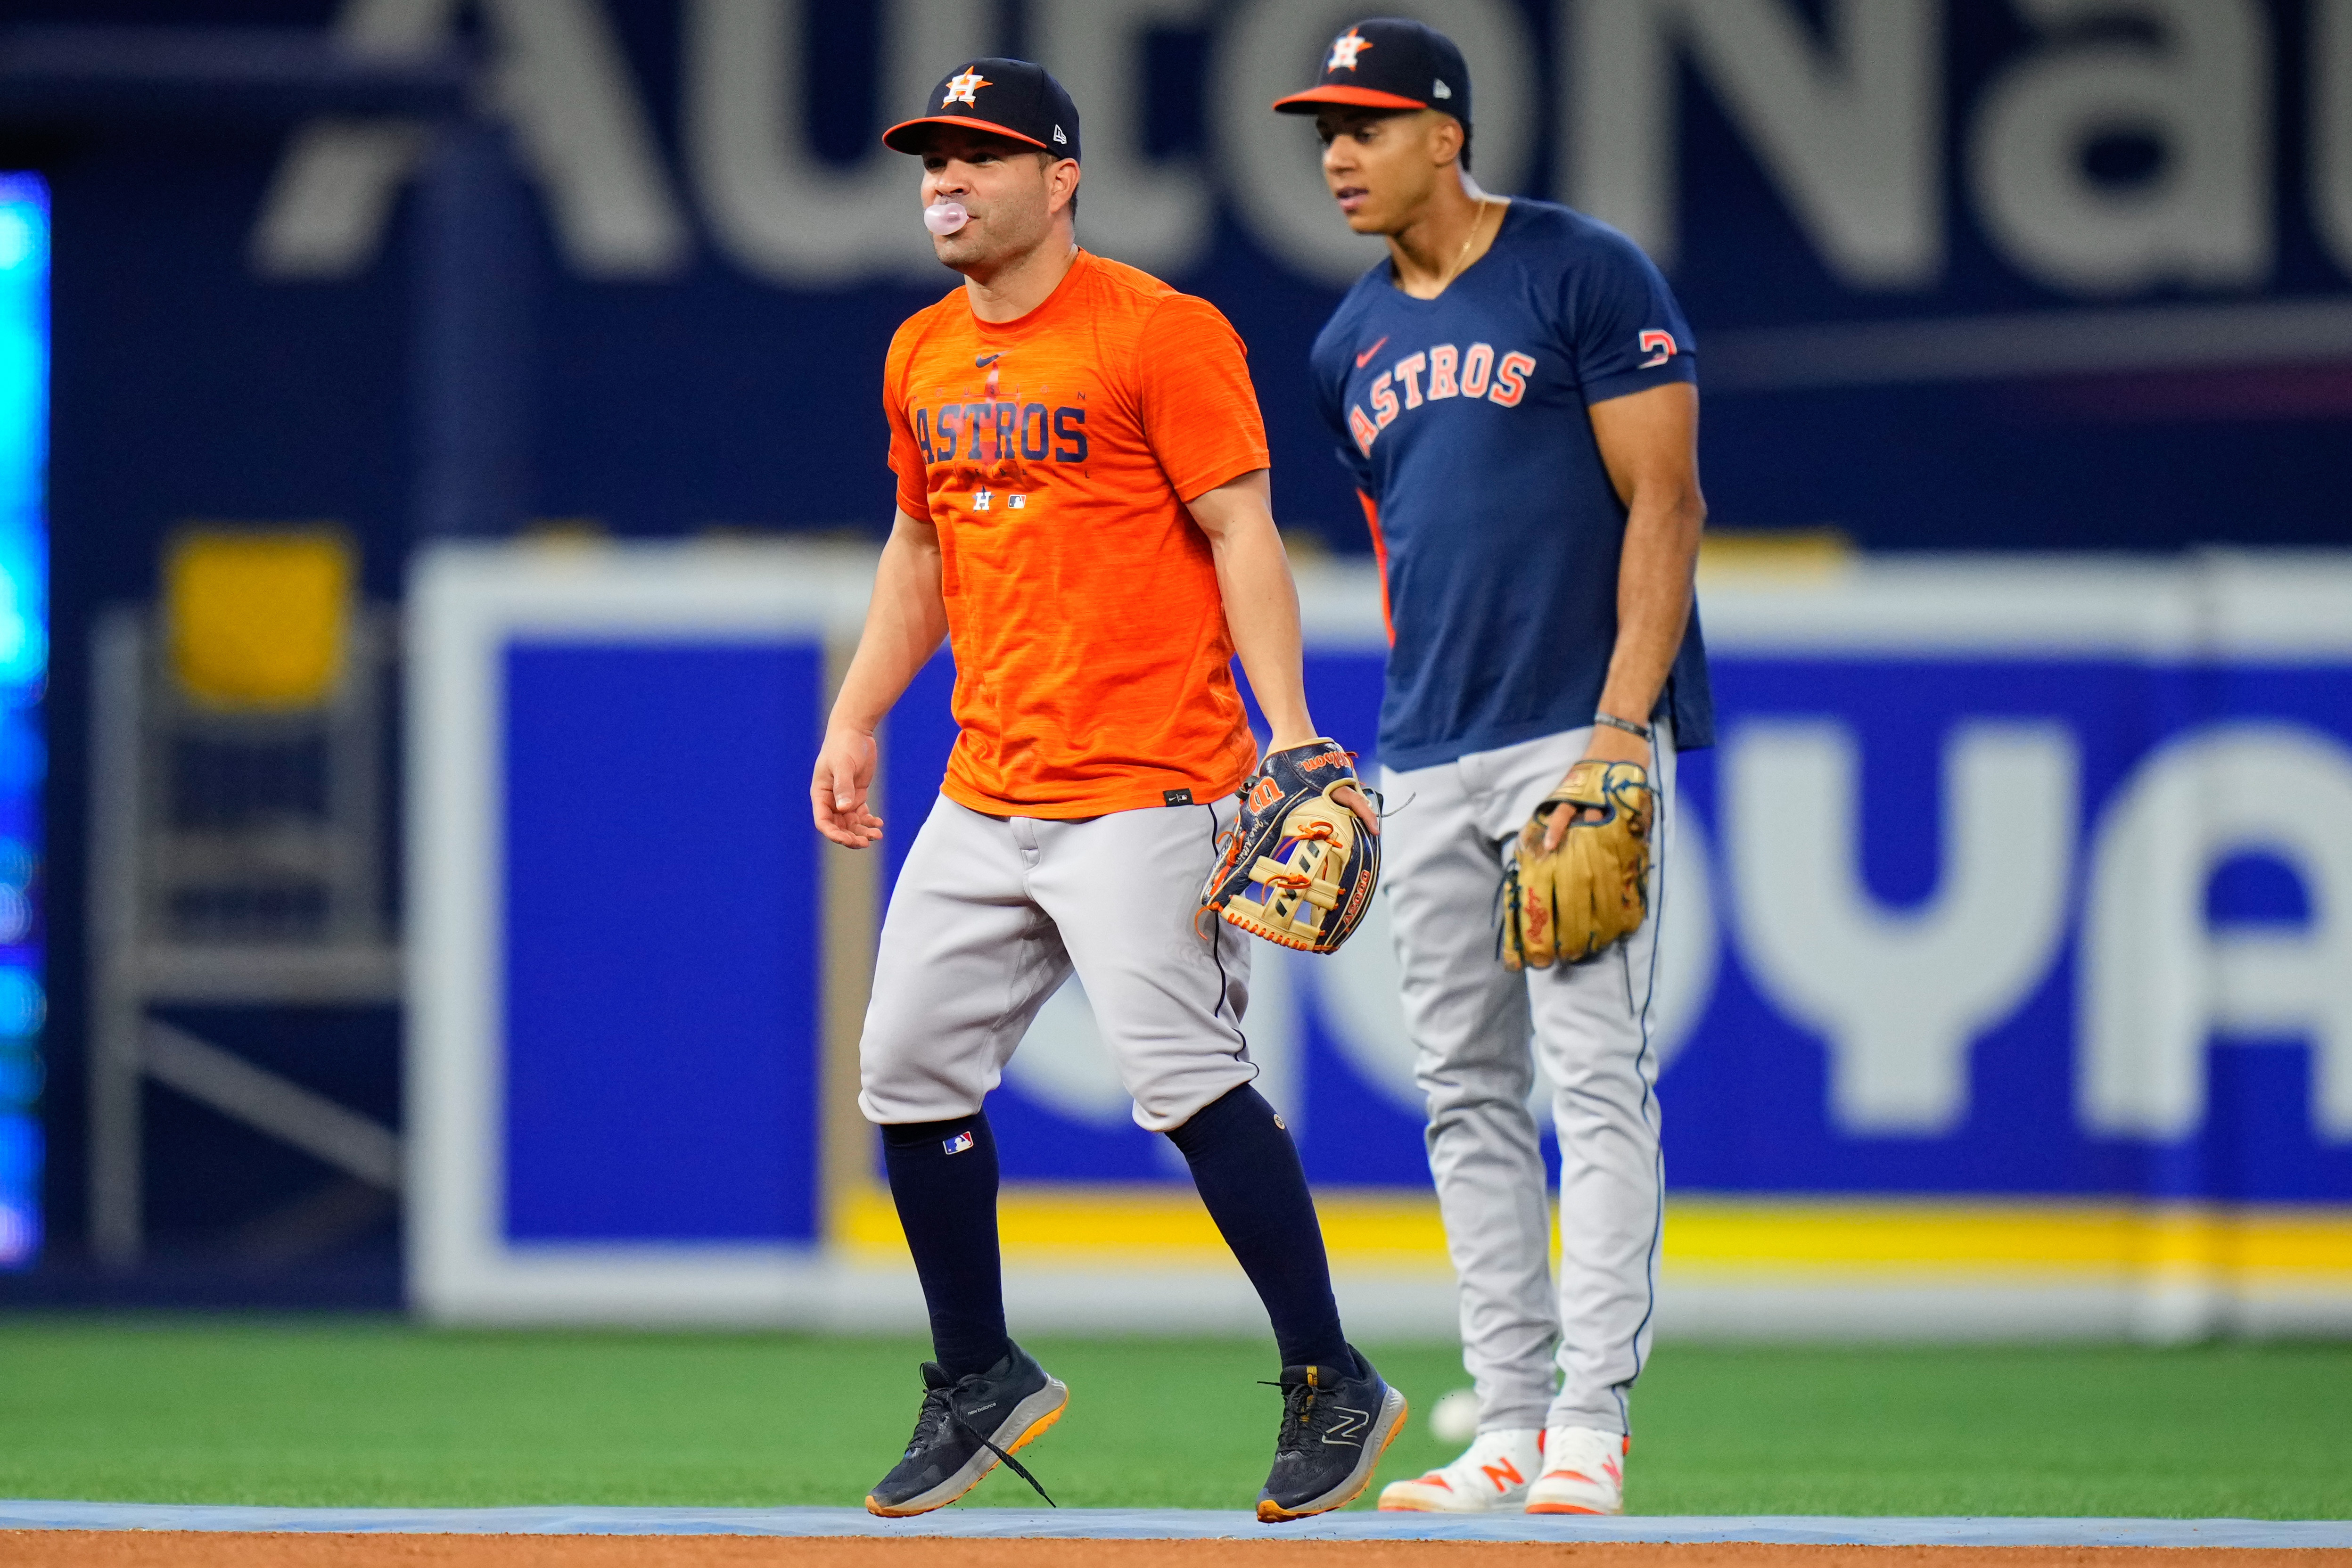 Astros' Altuve homers in first 3 at-bats against Rangers, gets 4 in a row  overall